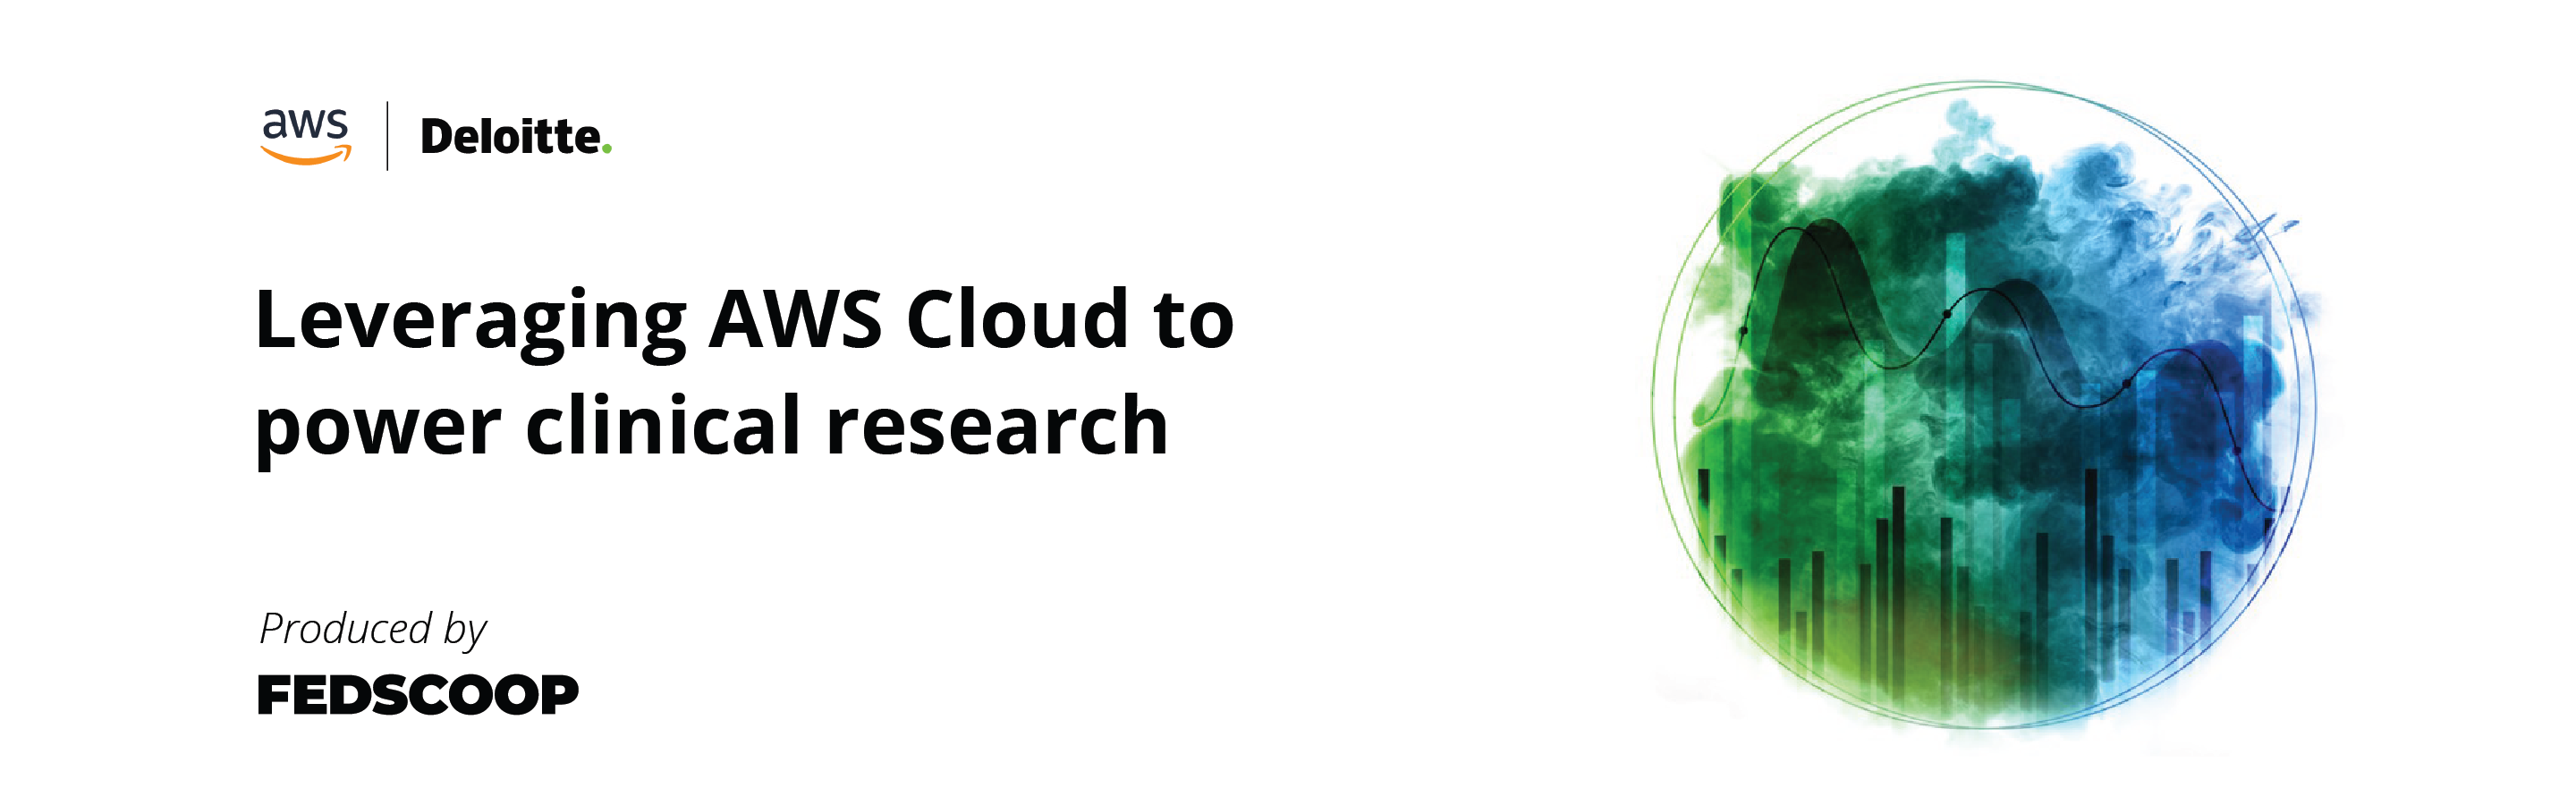 Leveraging AWS Cloud to power clinical research